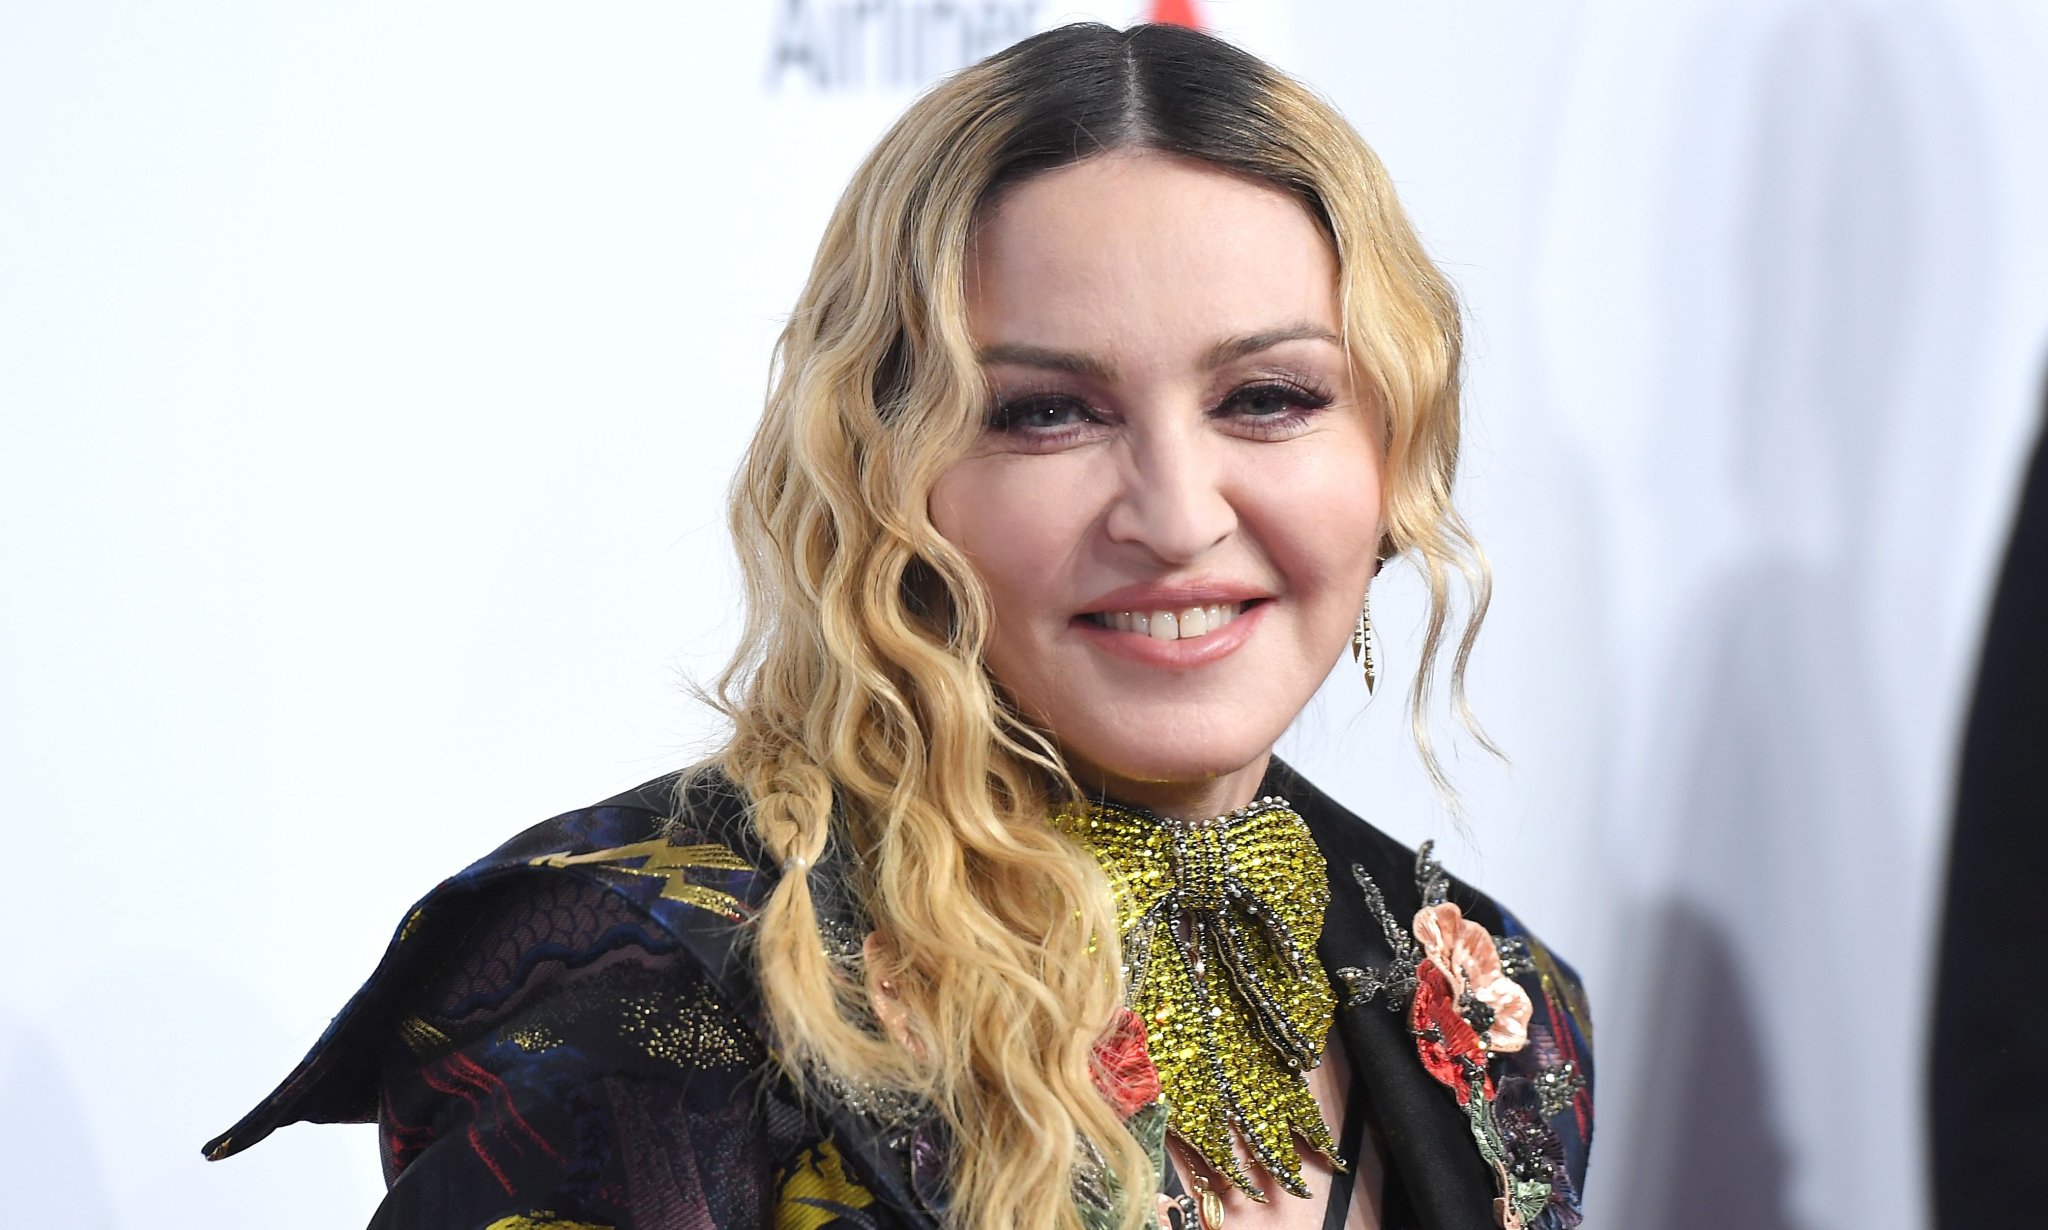 Madonna leads celebrity vogue for Covid-19 conspiracy theories